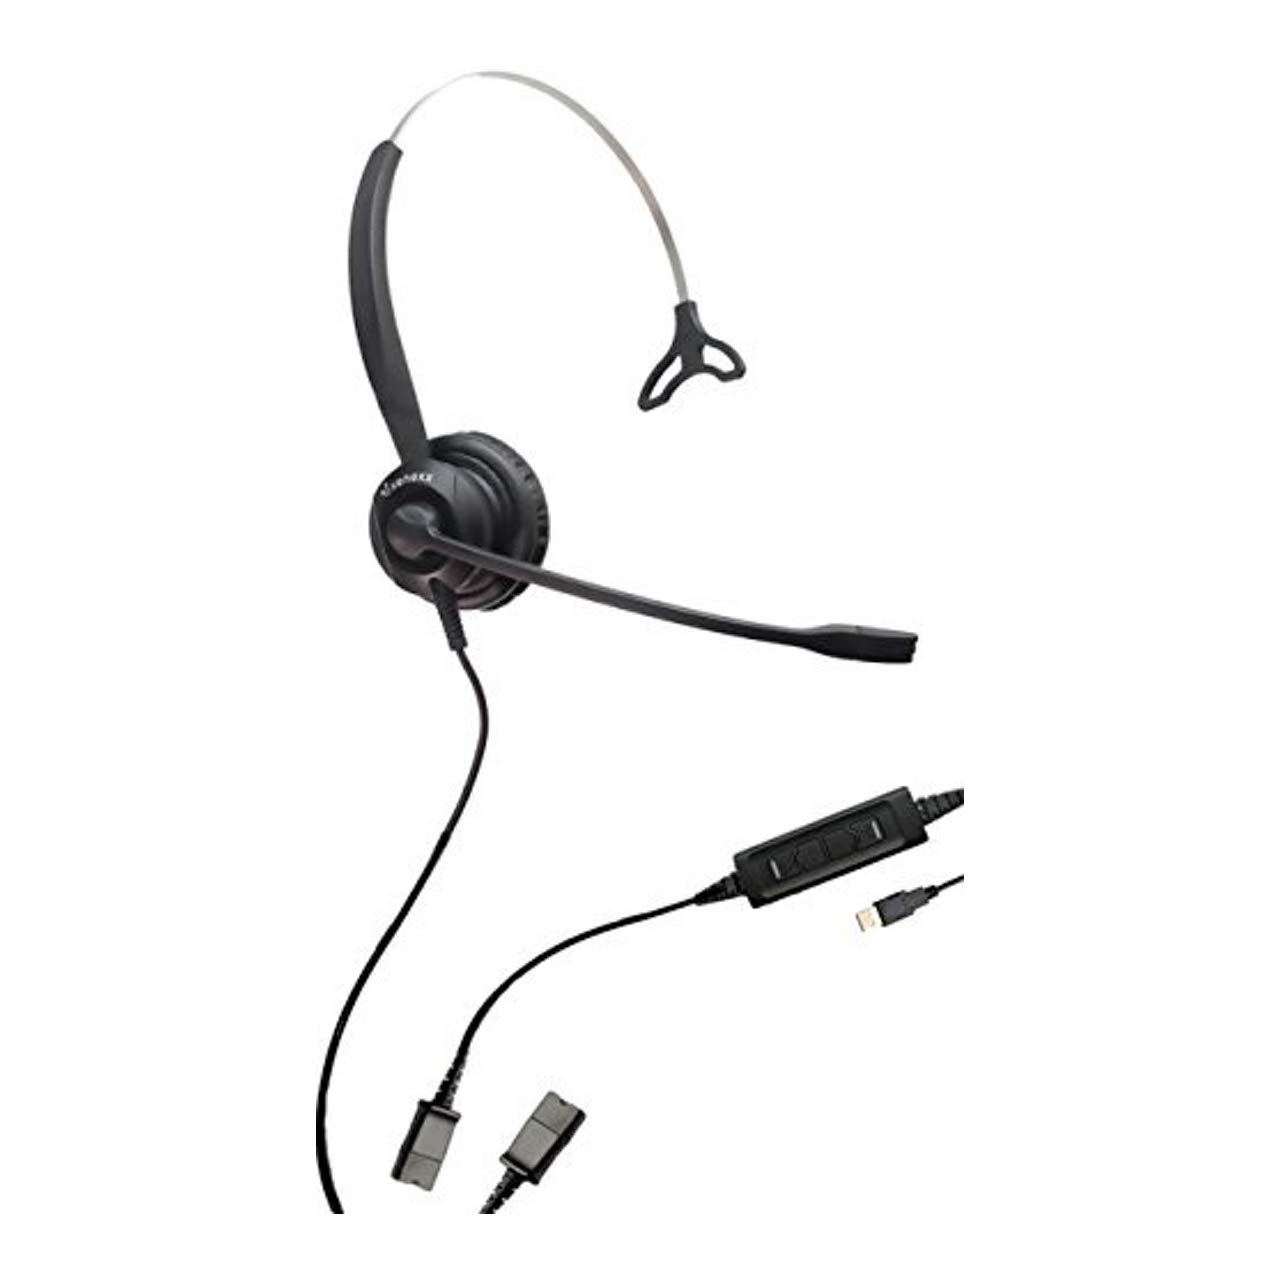 Durable construction: The headset should be constructed with durable materials that can withstand daily use and last for a long time.
Easy to use controls: The headset should have easy-to-use controls that allow you to adjust the volume, mute the microphone, and control other settings without taking your eyes off the screen.